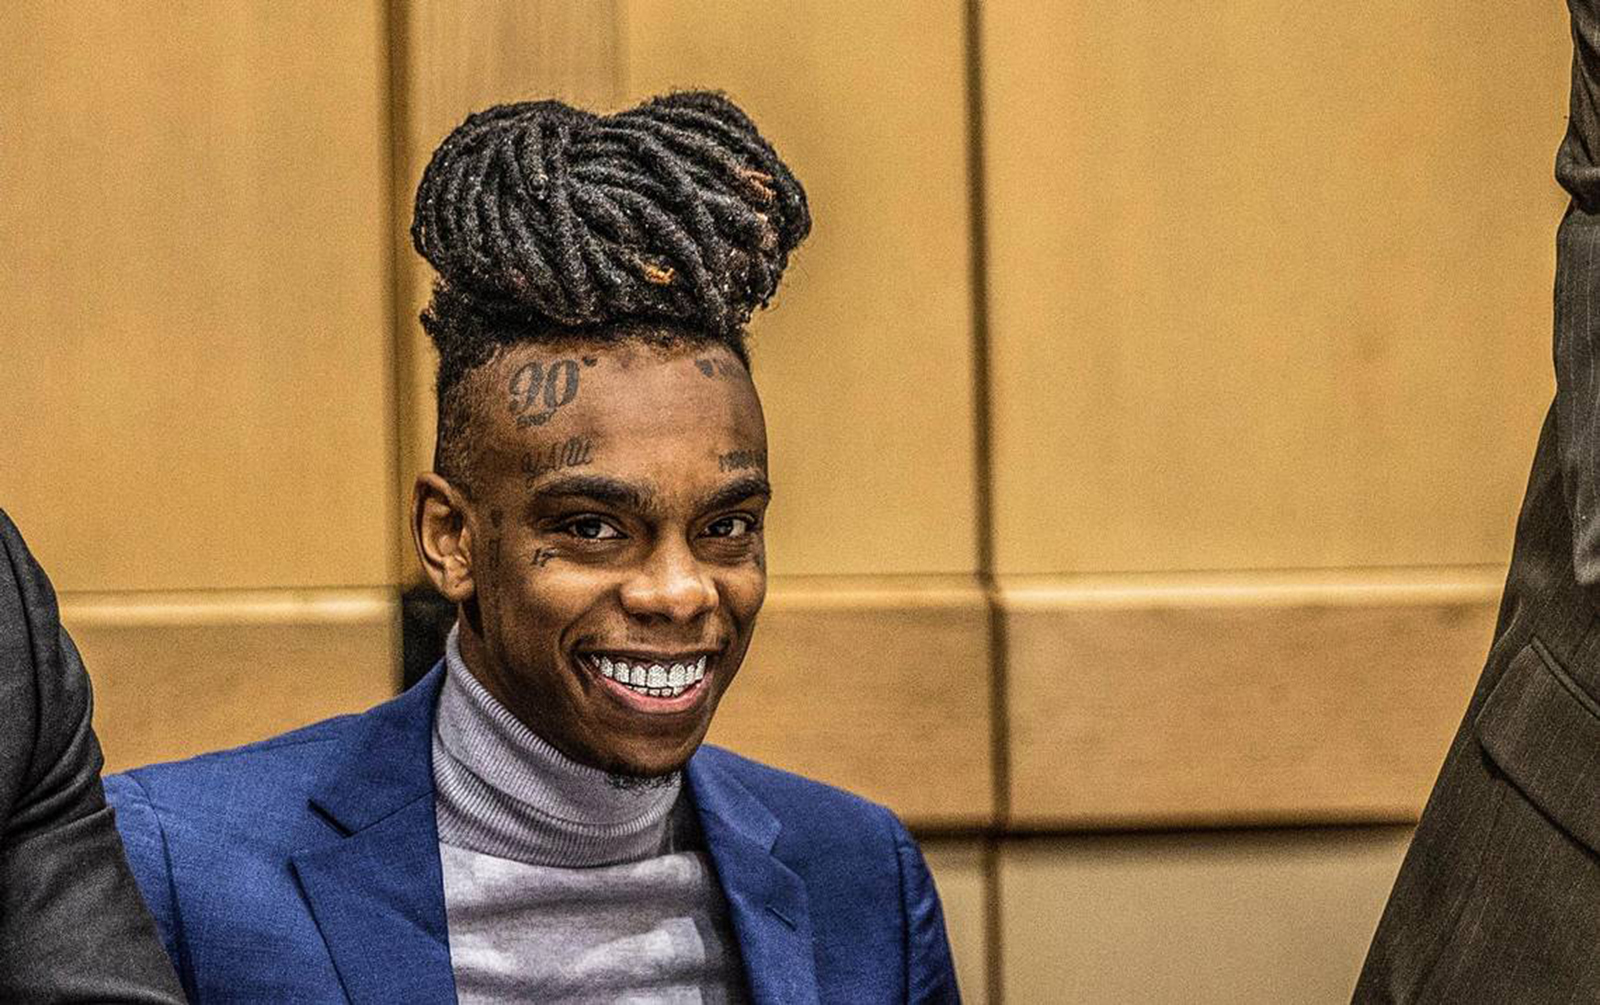 Jamell Maurice Demons, known as YNW Melly, is seen during a jury selection hearing presided by Judge John J. Murphy III, on April 12, 2023, in Fort Lauderdale, Florida | Source: Getty Images